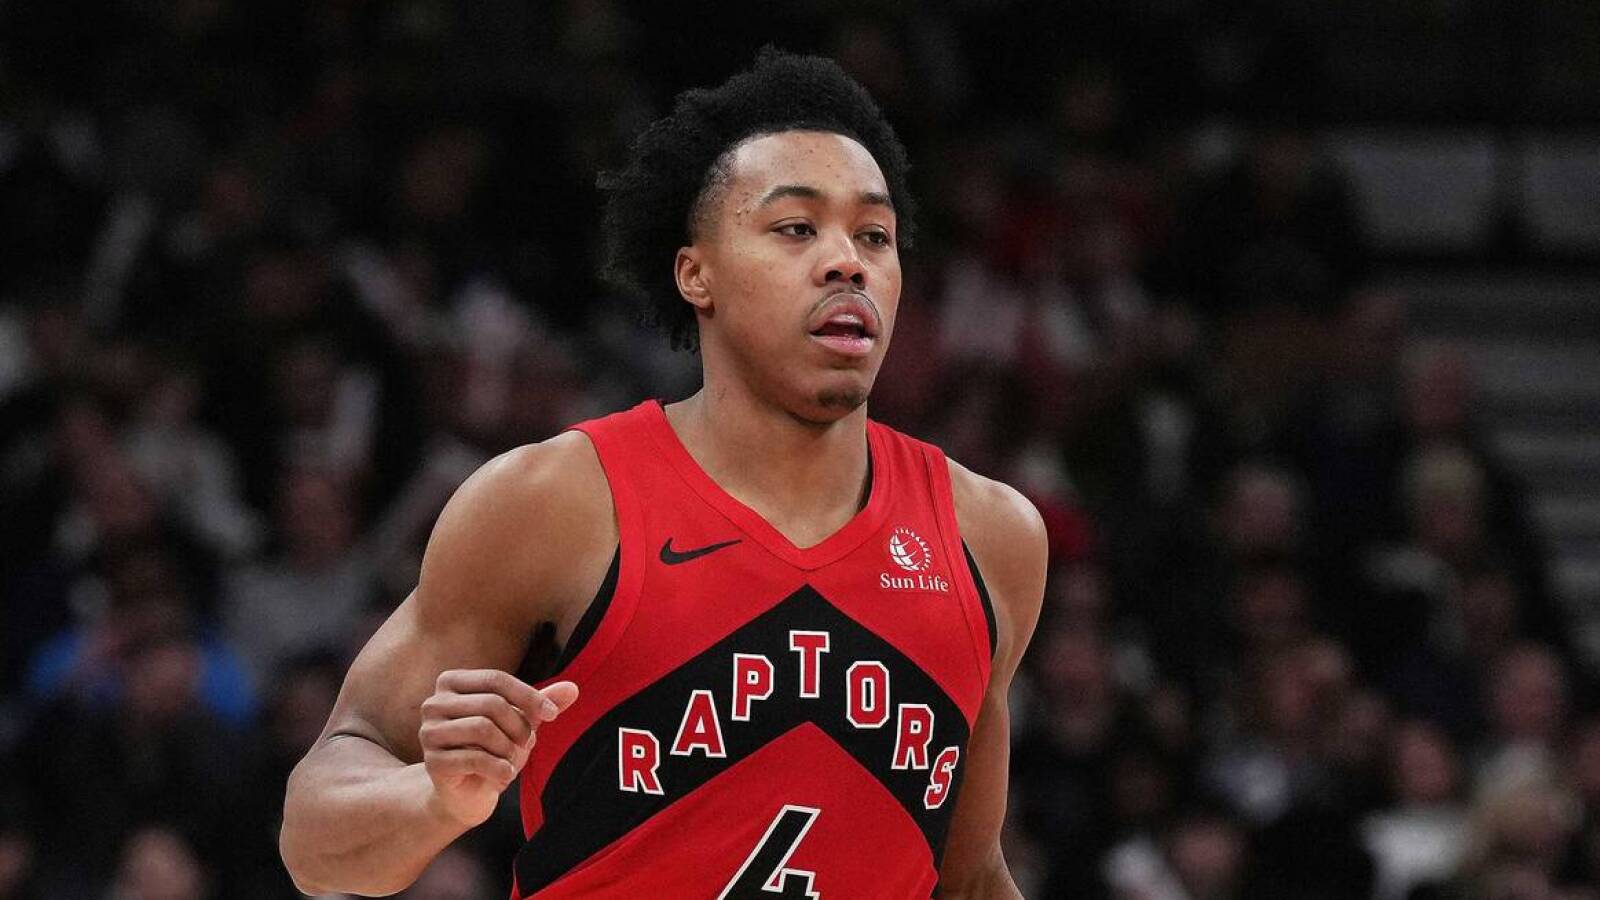 Raptors All-Star undergoes surgery for fractured hand